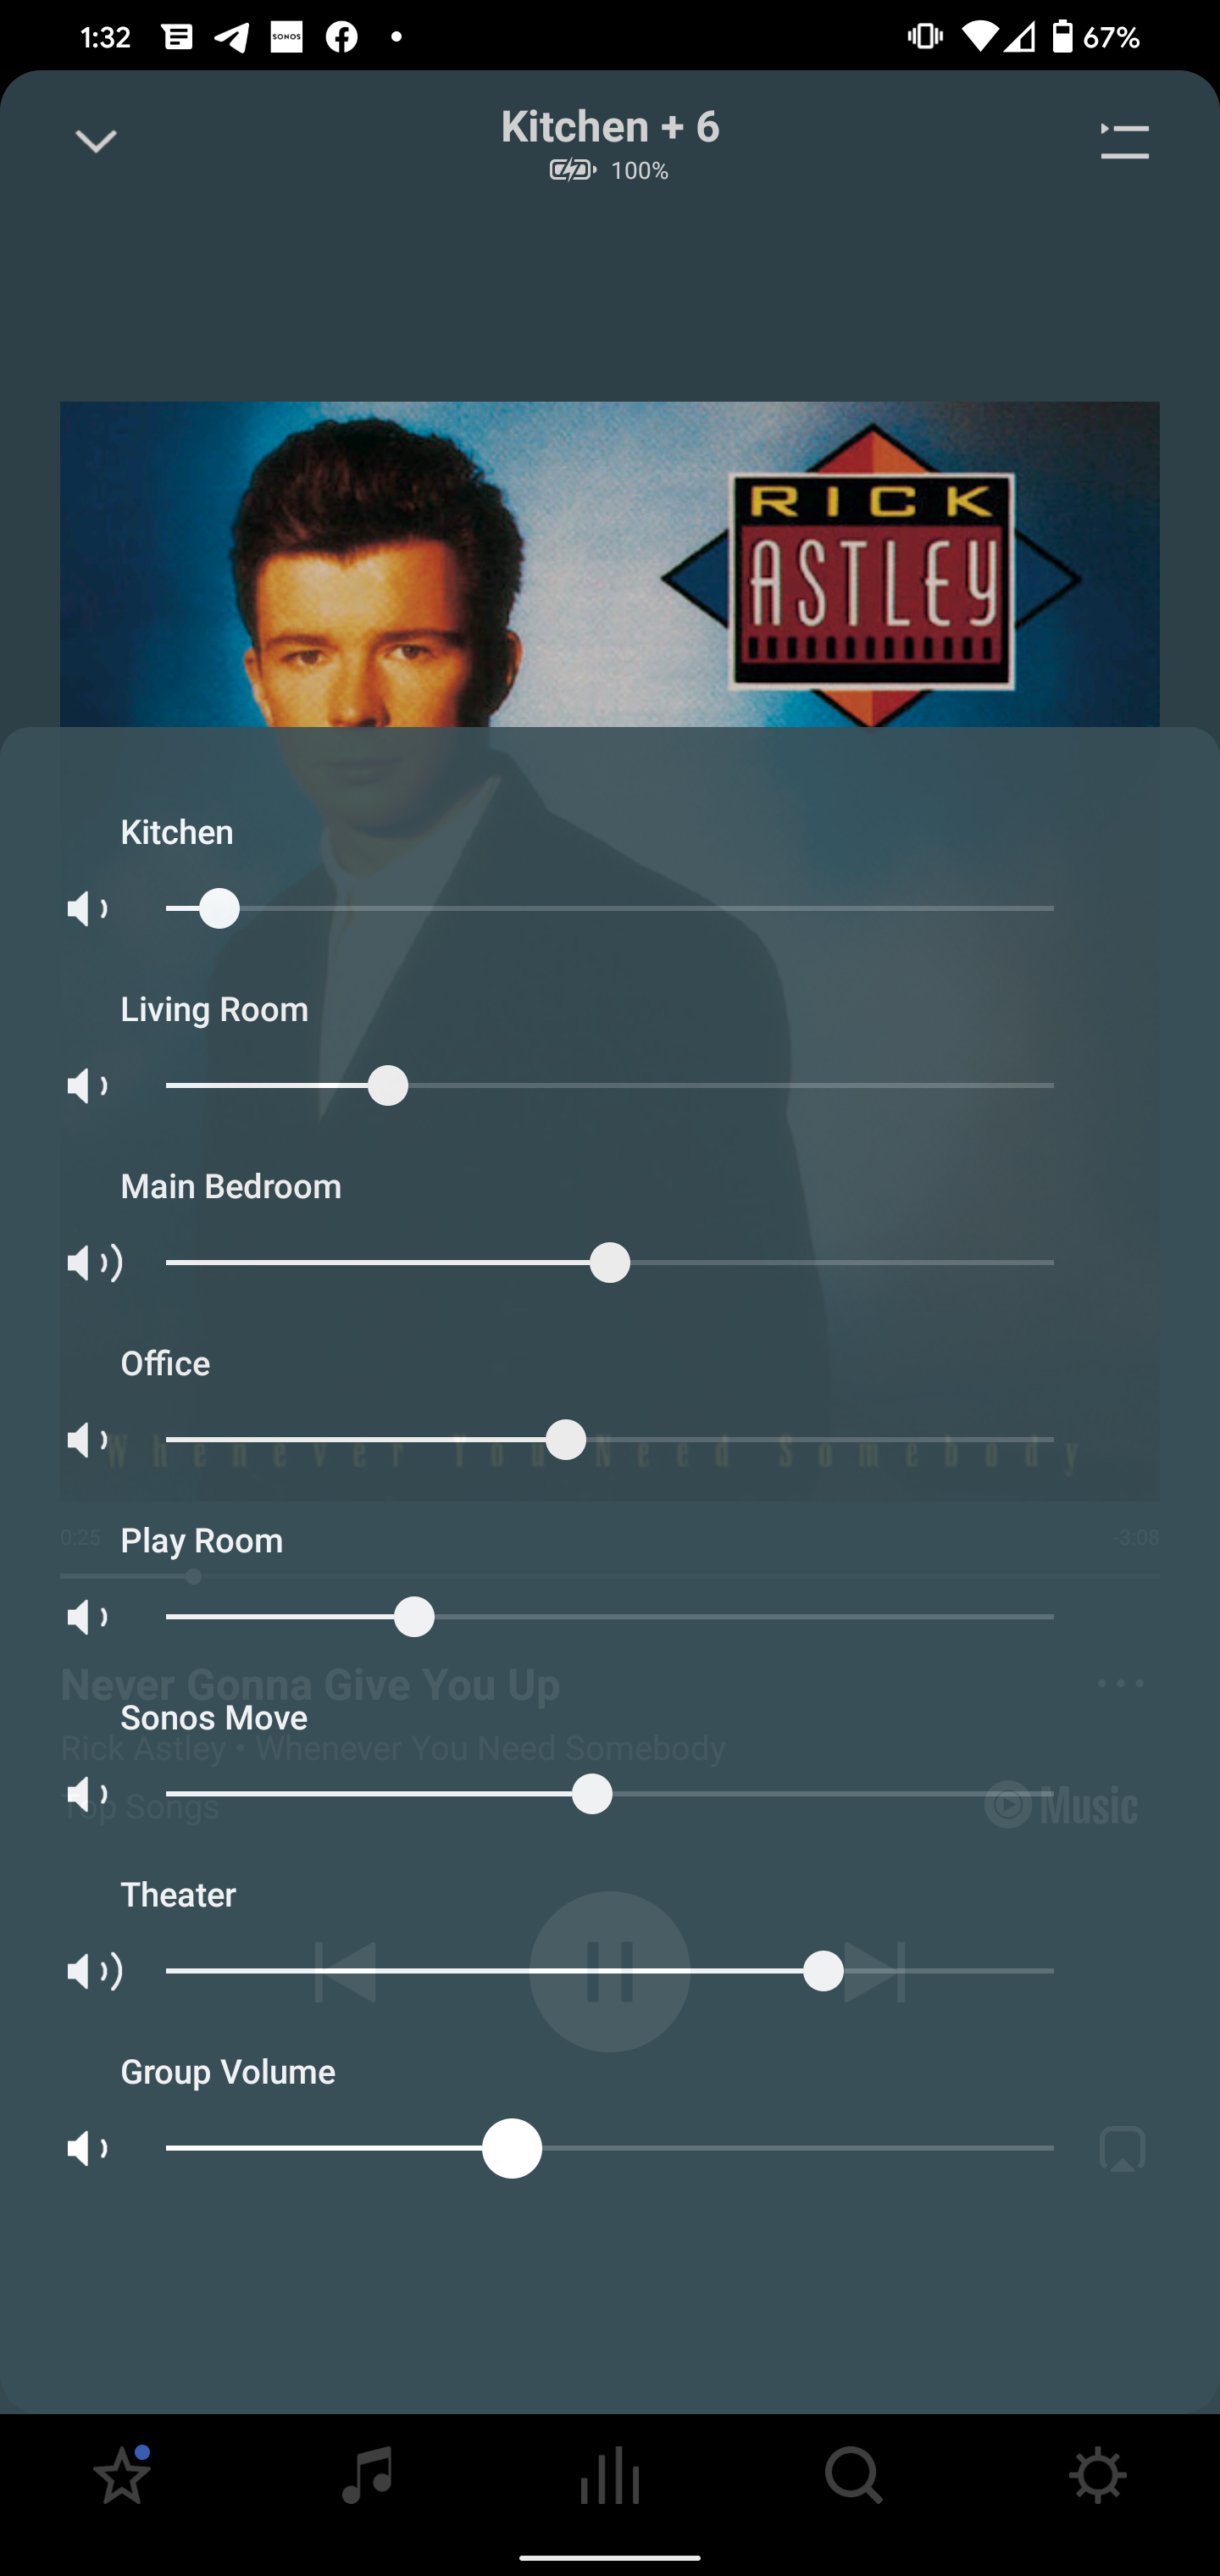 Stor genvinde spredning Feature Request: One Click Volume Match for Groups | Sonos Community